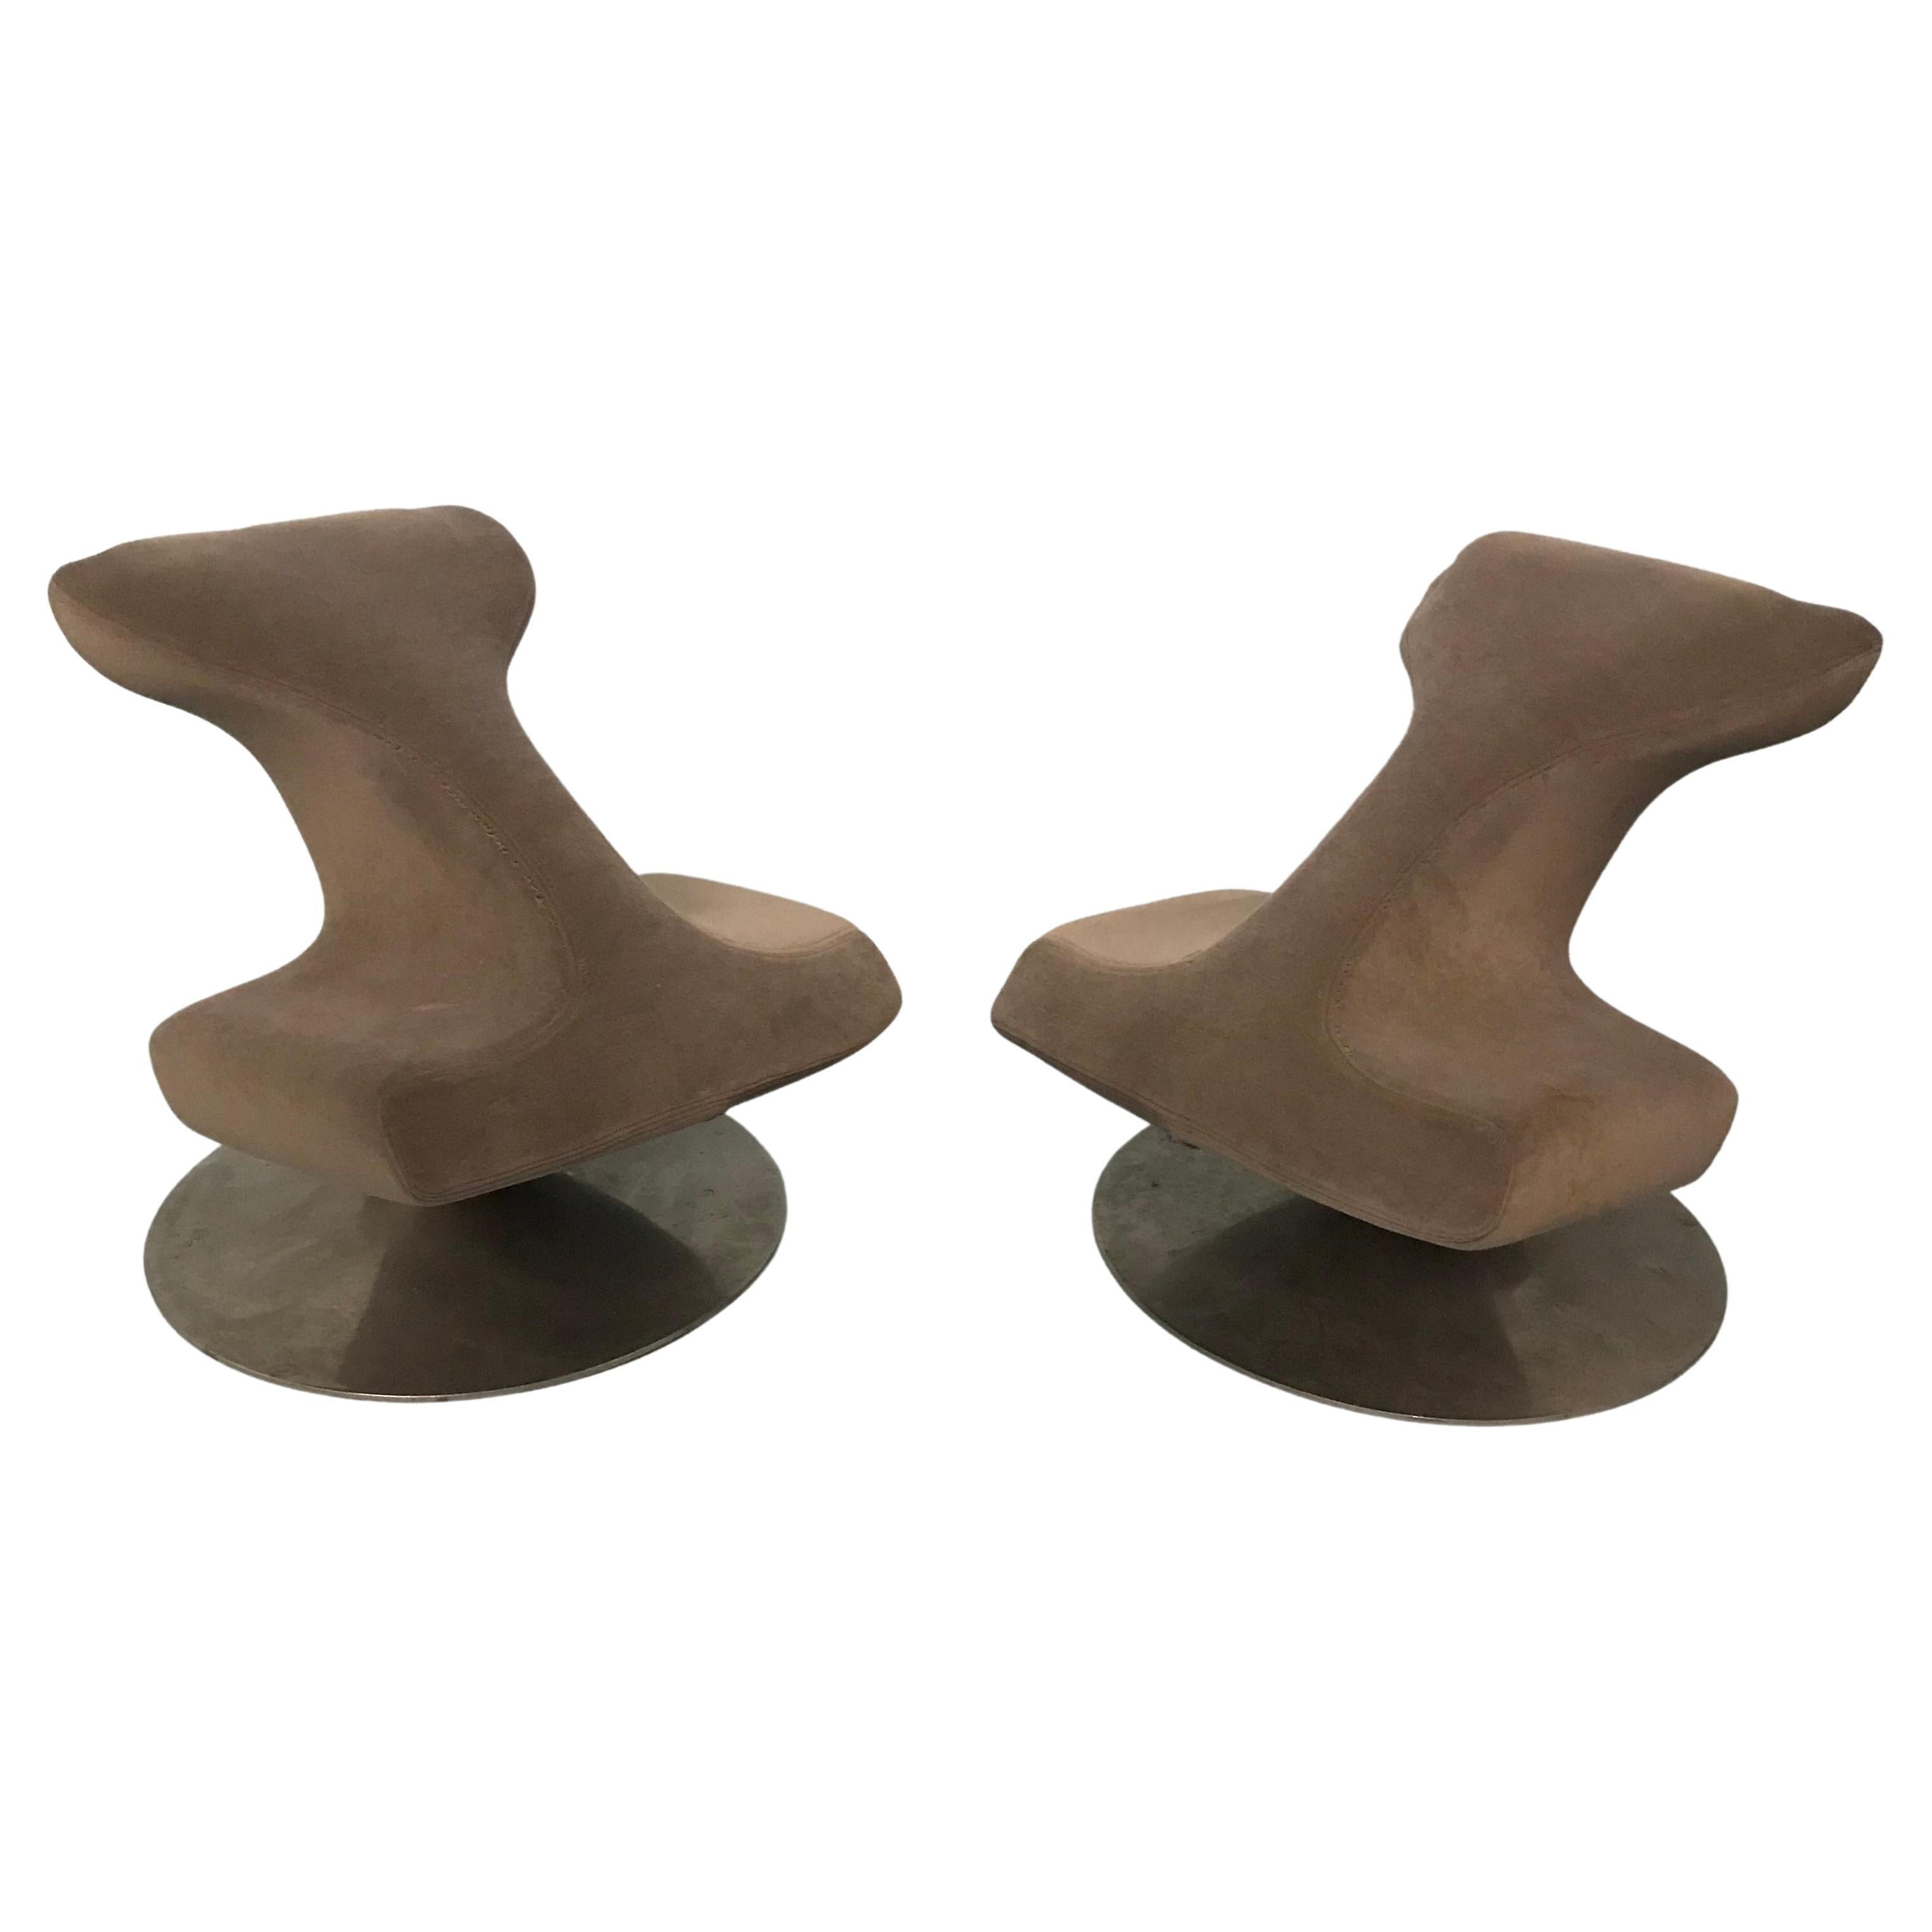 A Pair of 1970’s Radical Modern French Kneeling Stools attributed to Artifort For Sale